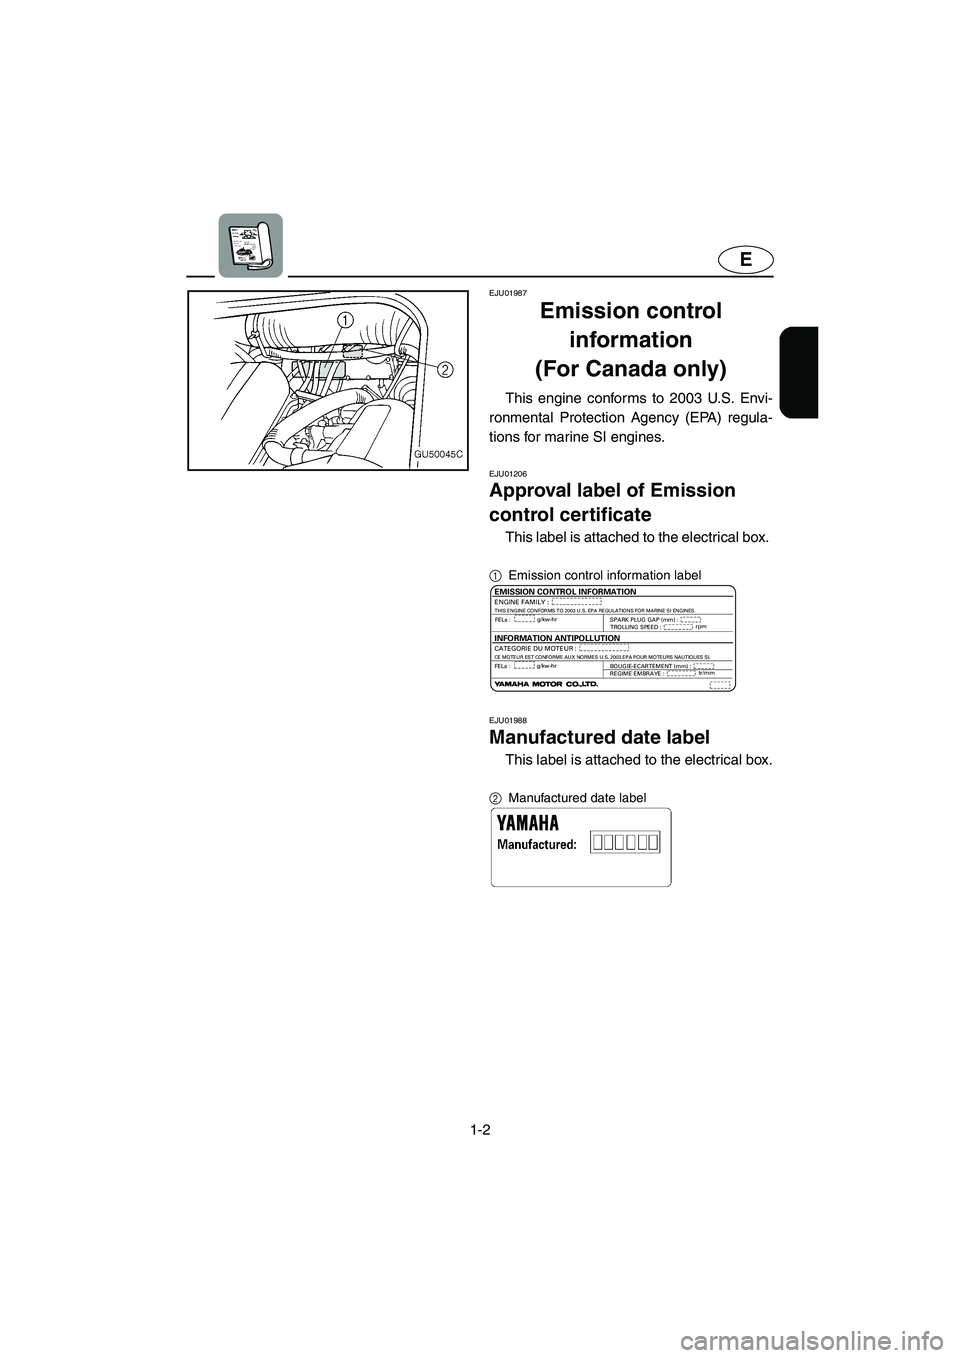 YAMAHA SUV 1200 2003  Owners Manual 1-2
E
EJU01987
Emission control 
information 
(For Canada only) 
This engine conforms to 2003 U.S. Envi-
ronmental Protection Agency (EPA) regula-
tions for marine SI engines.
EJU01206 
Approval label